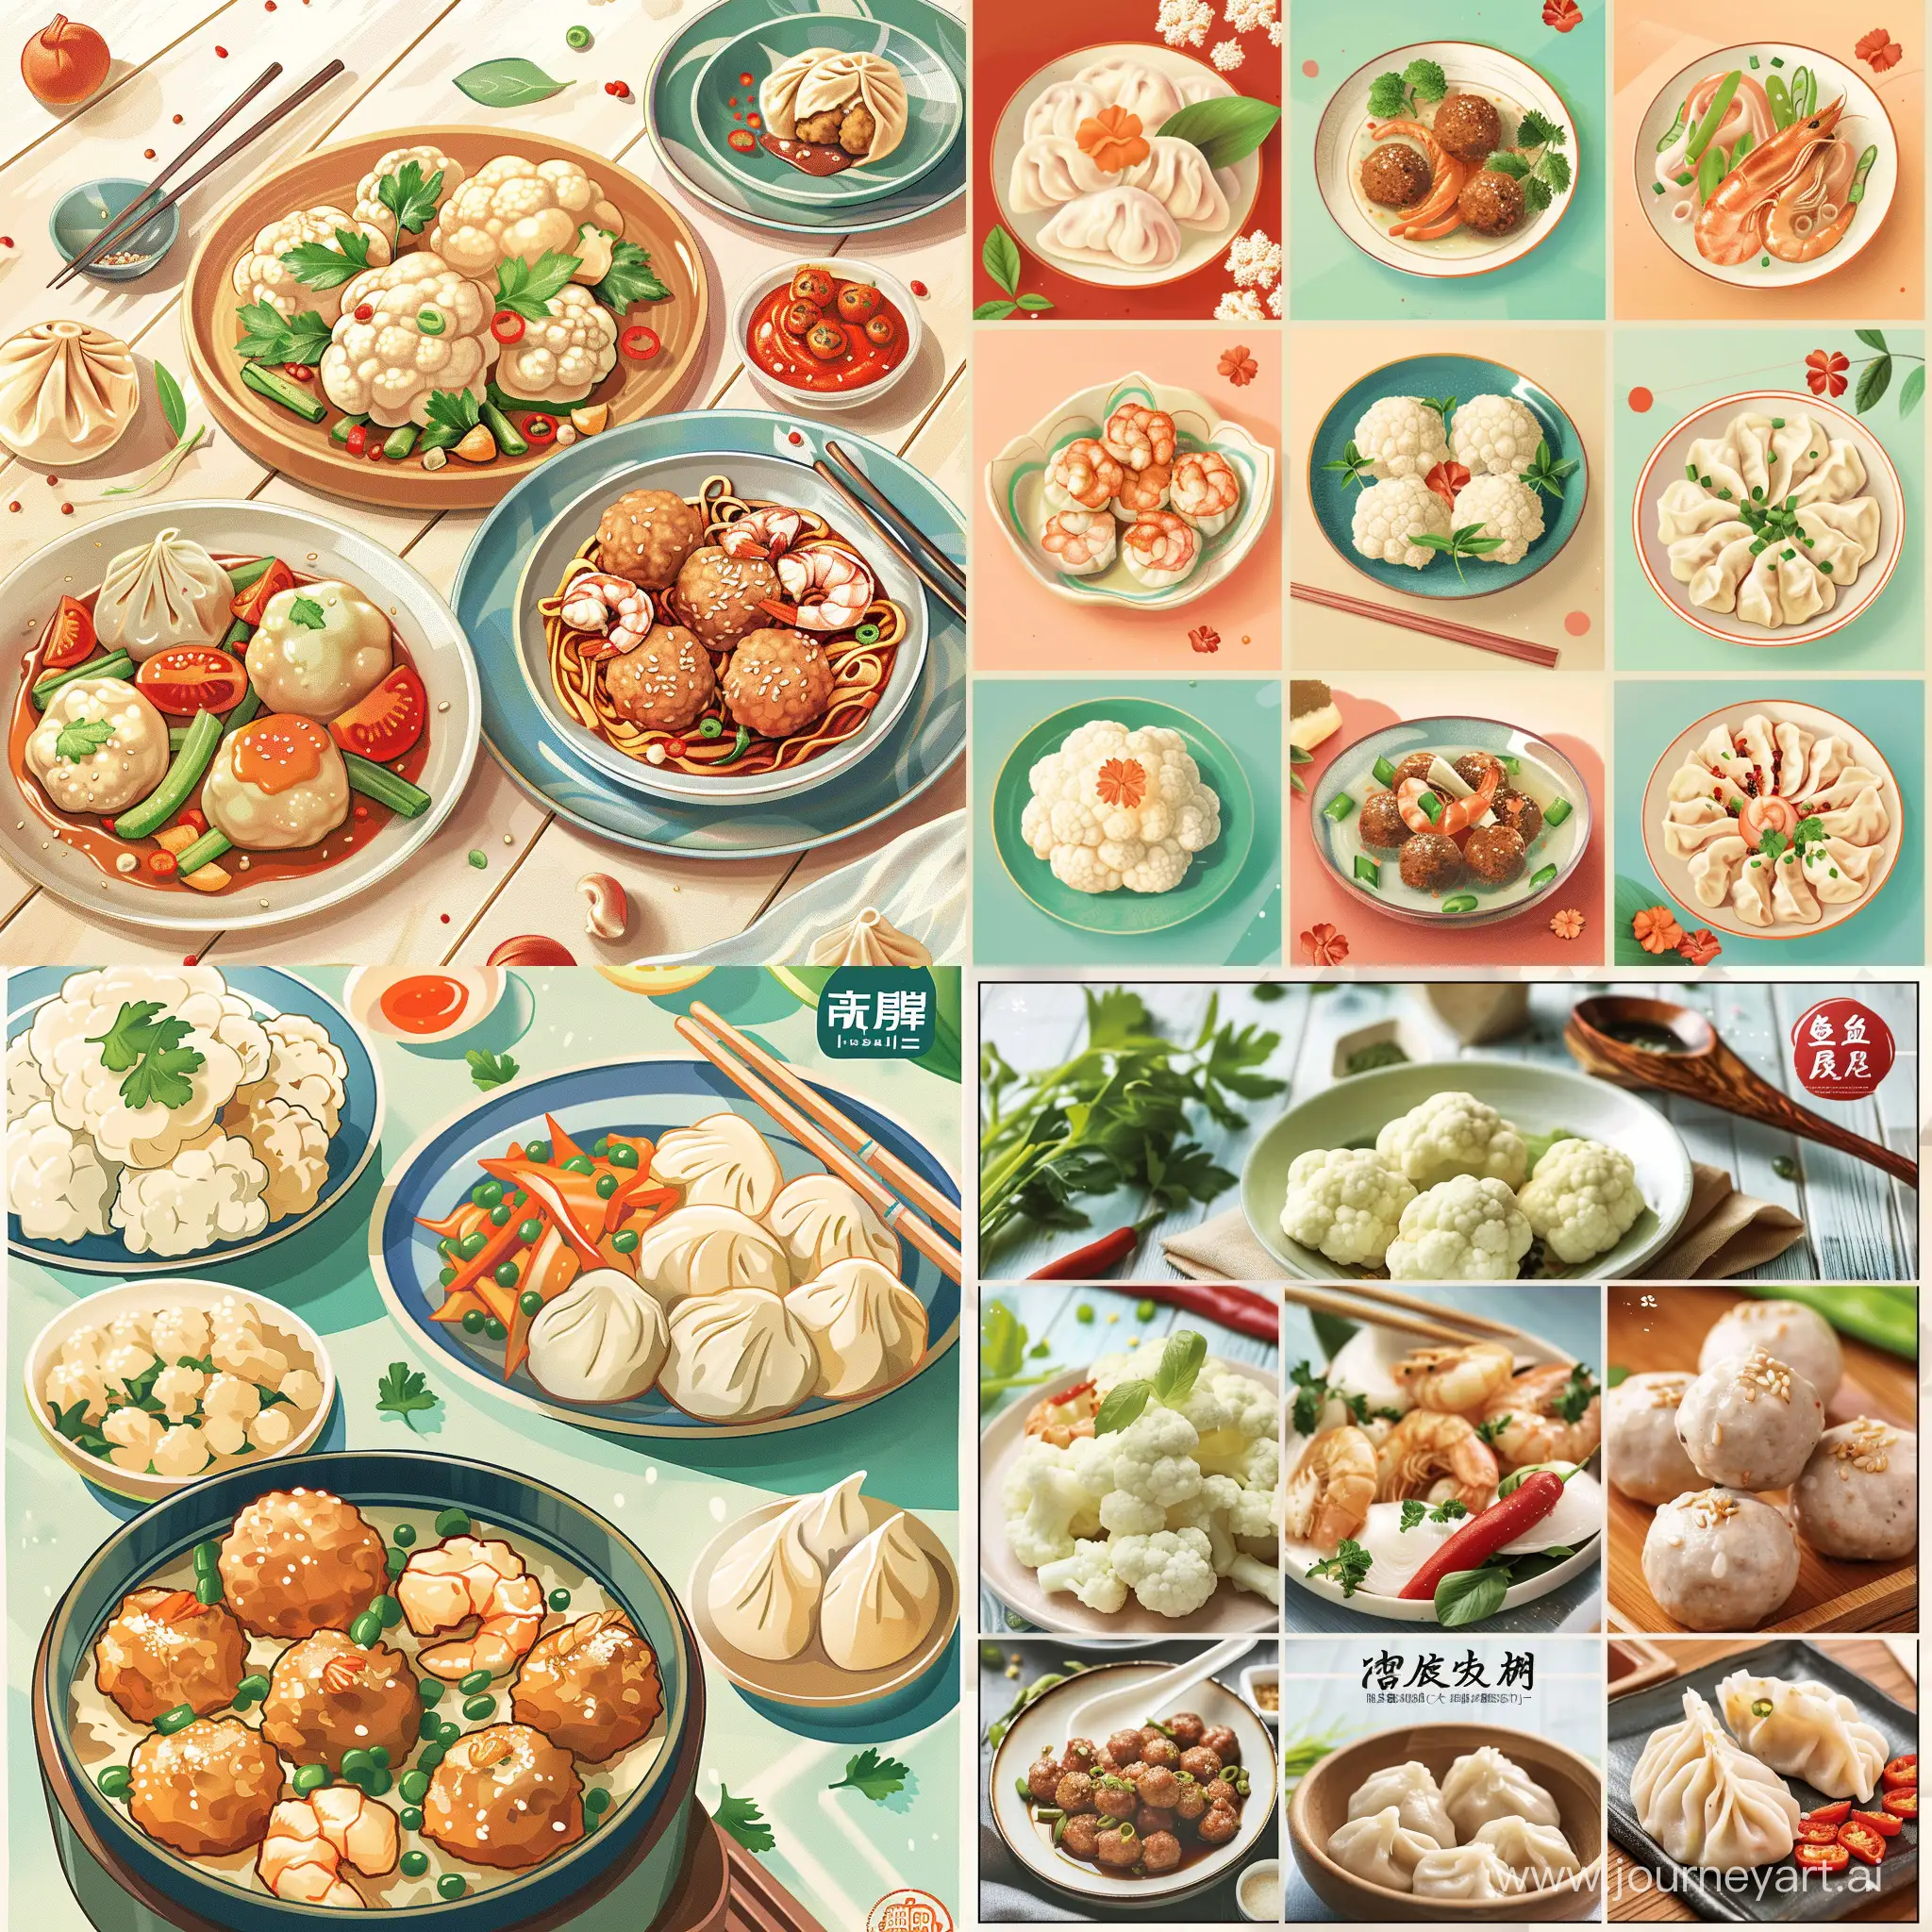 Colorful-Balanced-Diet-Poster-Cauliflower-StirFry-Meatball-with-Shrimp-and-Dumplings